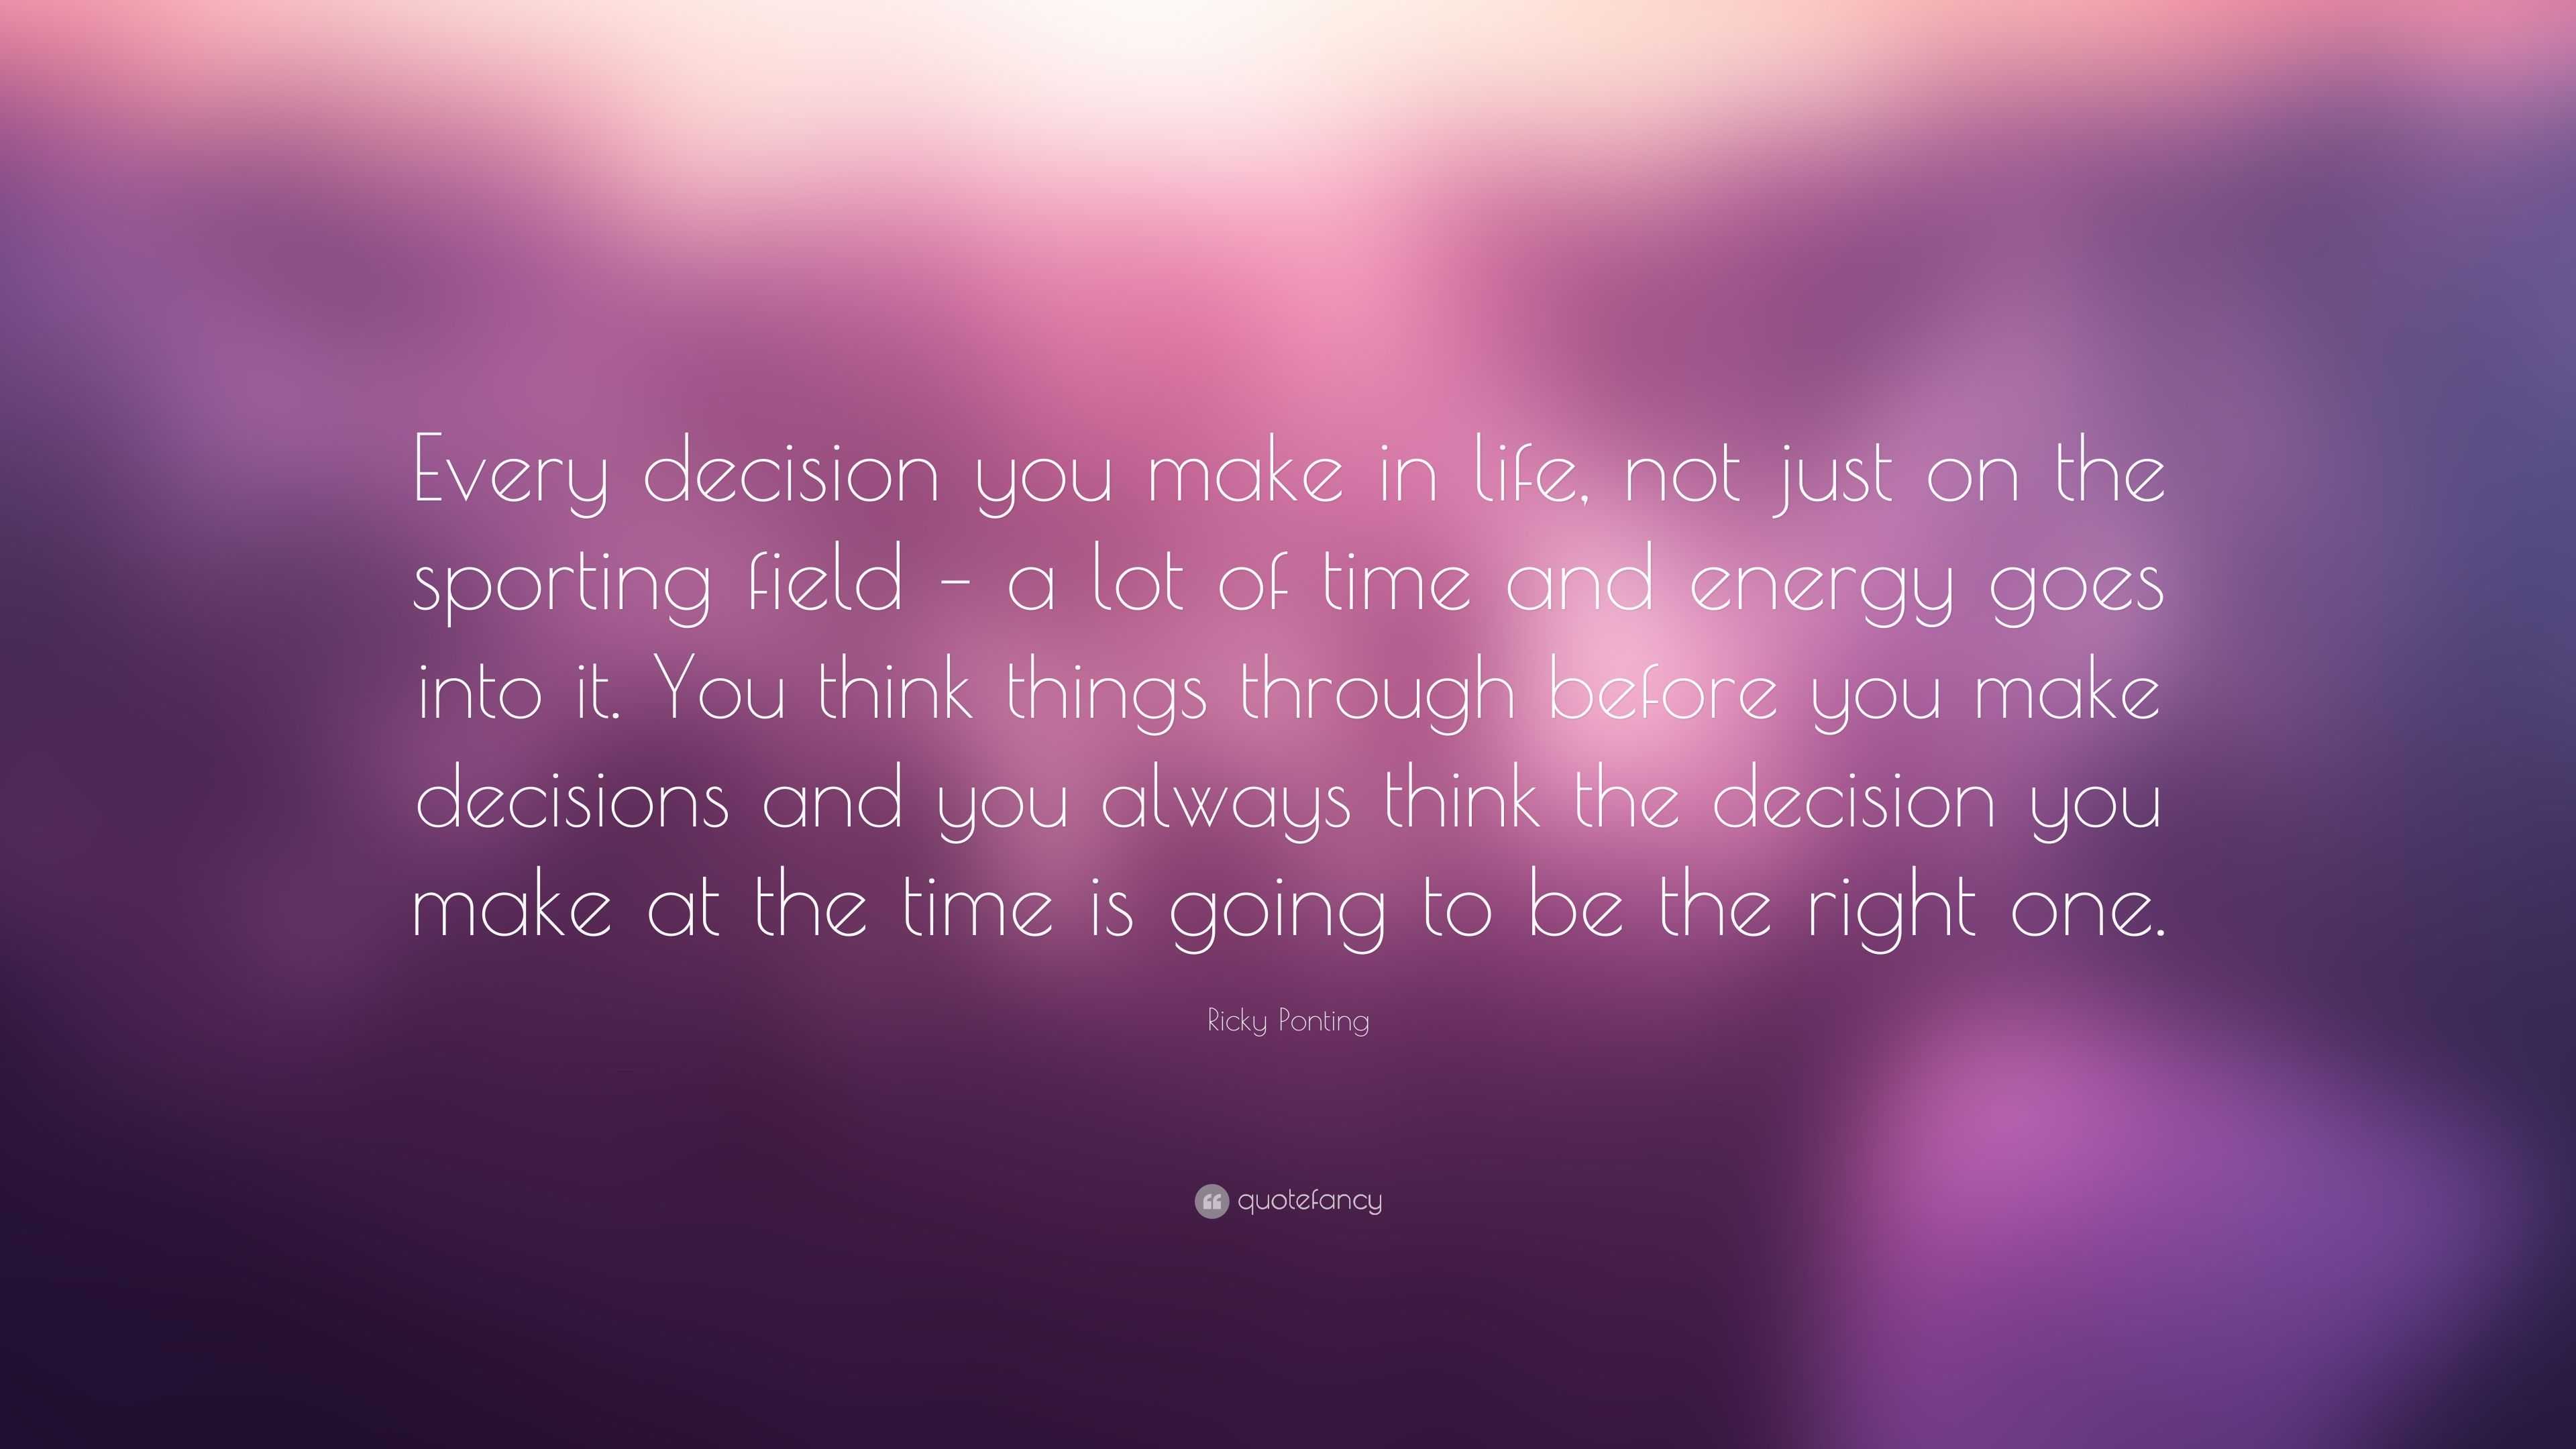 Ricky Ponting Quote “Every decision you make in life not just on the